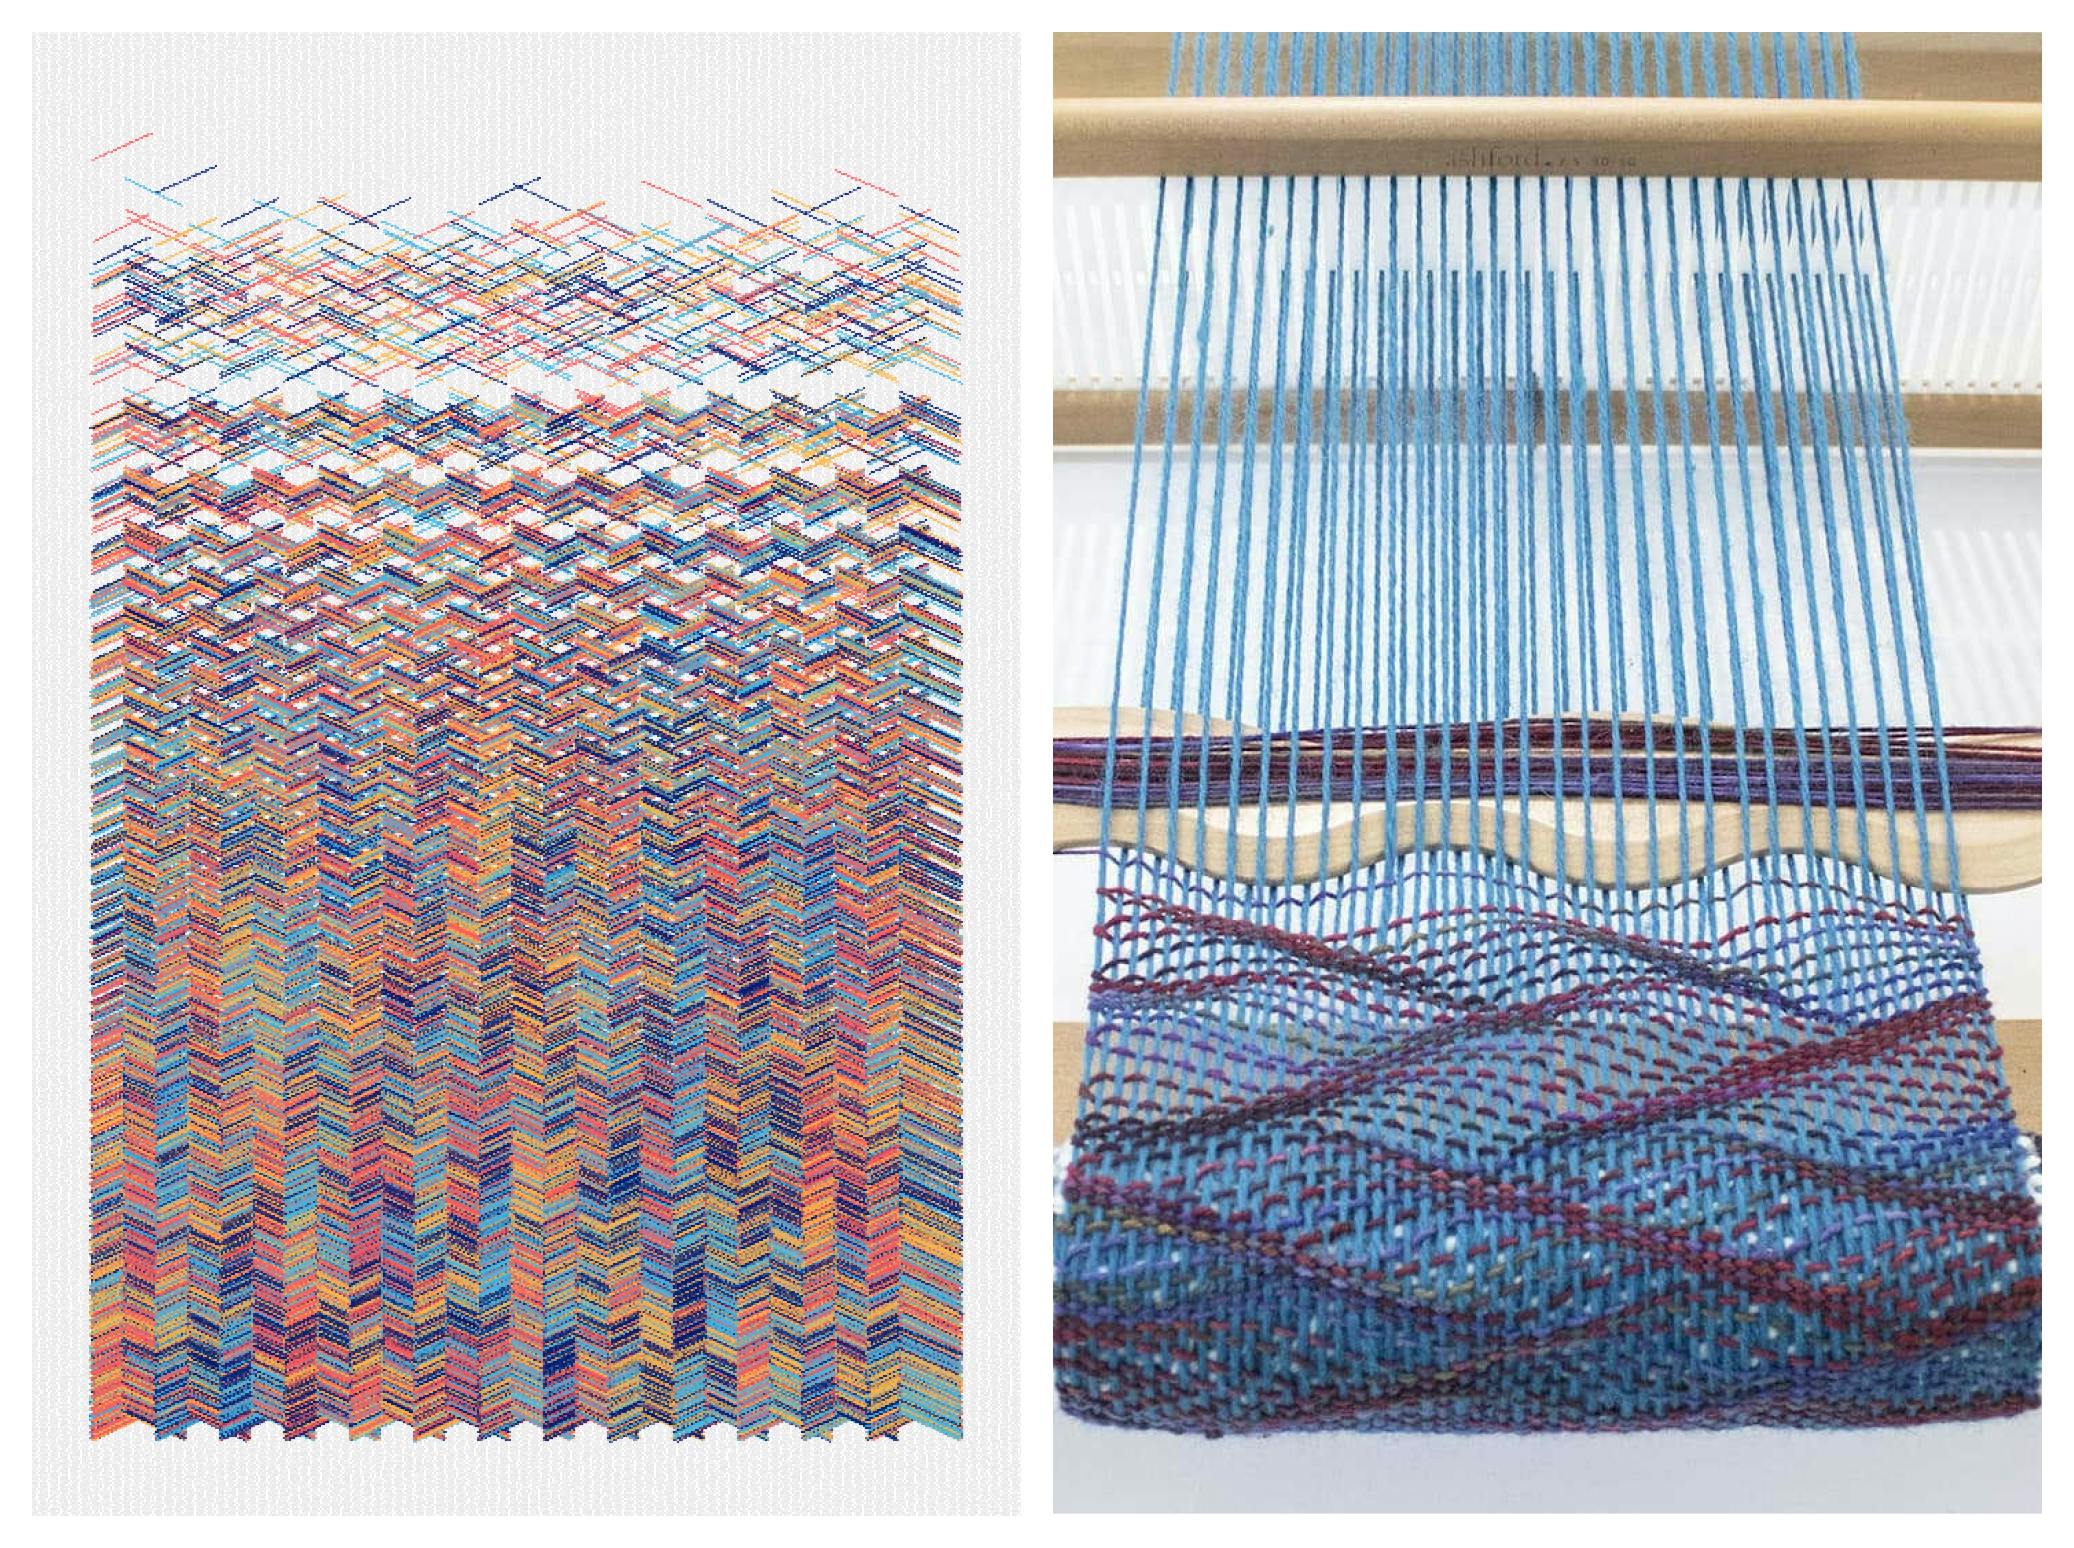 Sequence #251 and woven fabric